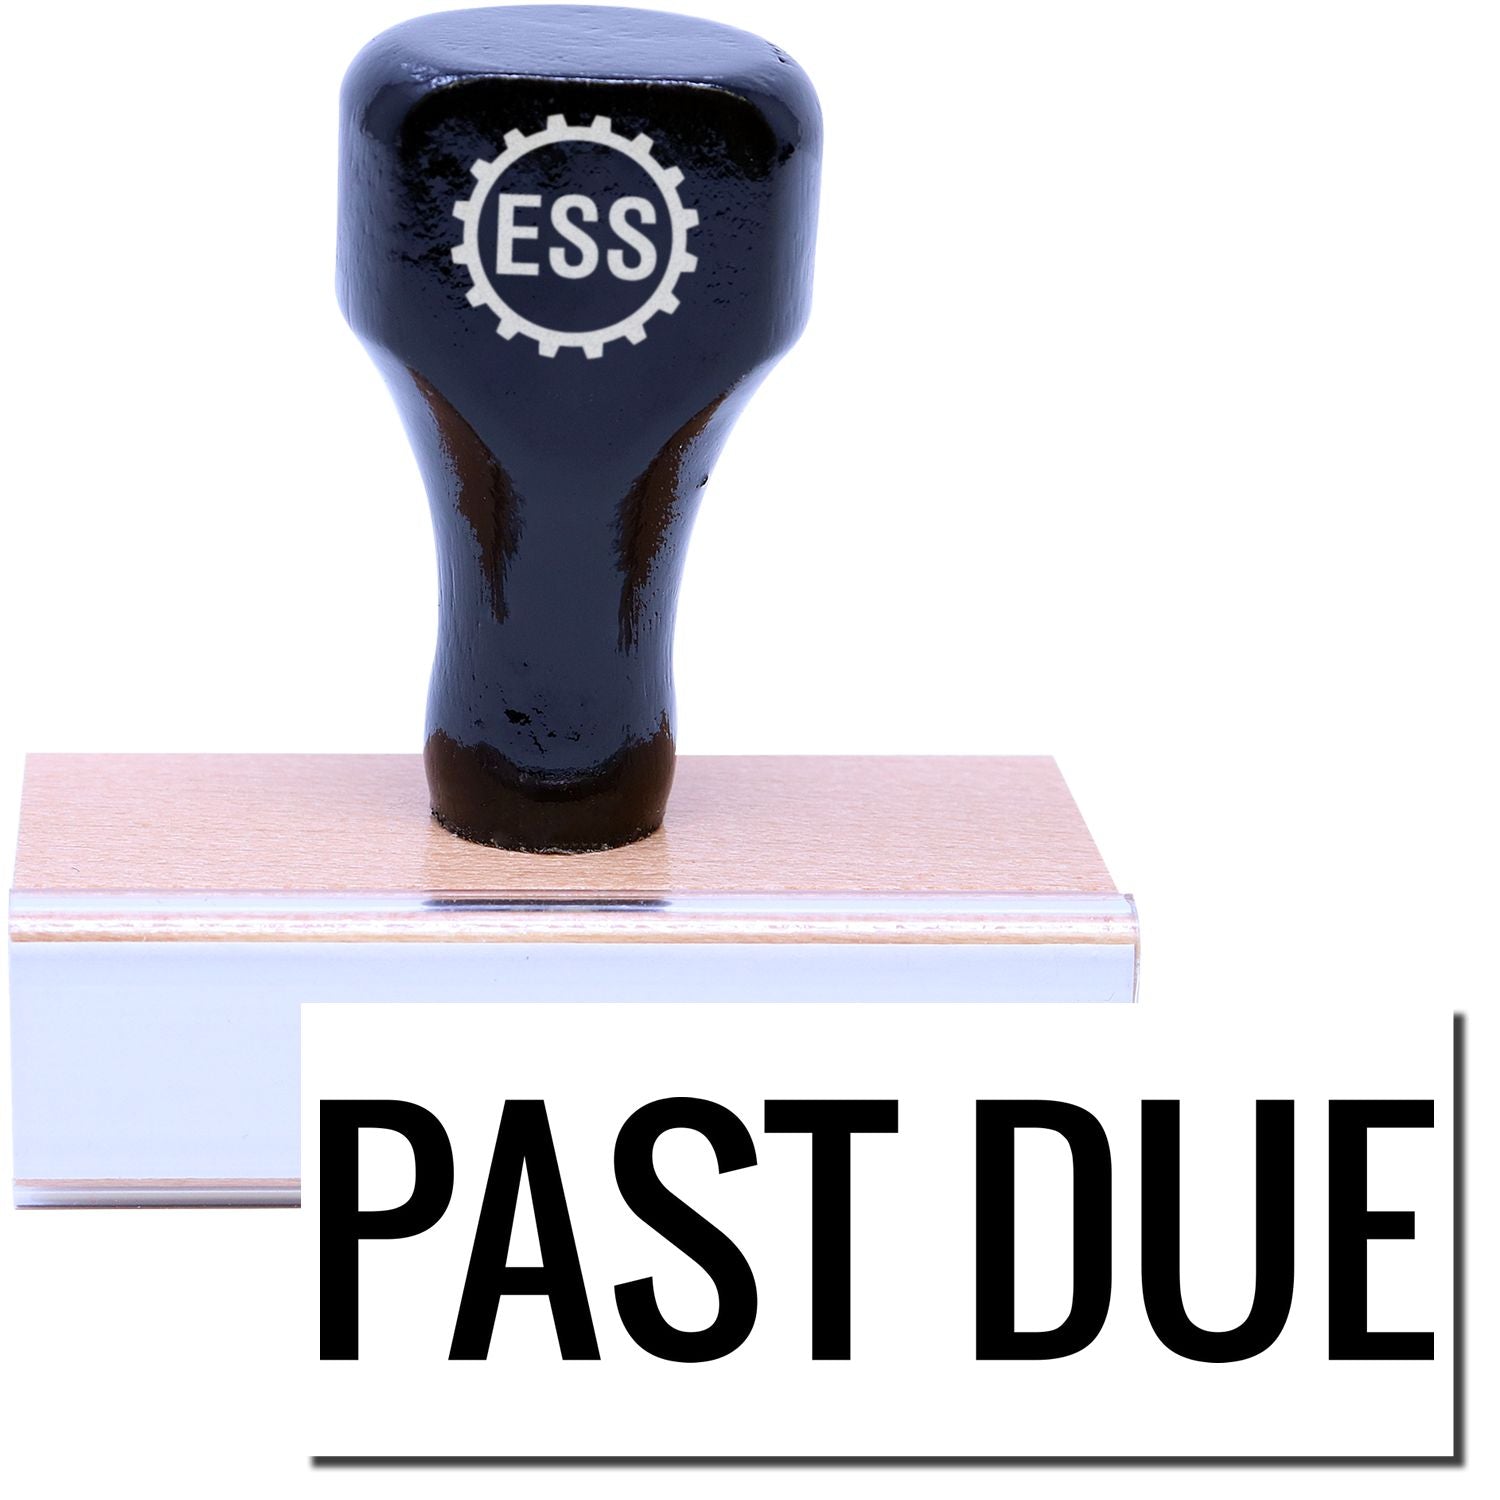 A stock office rubber stamp with a stamped image showing how the text "PAST DUE" in a large narrow bold font is displayed after stamping.